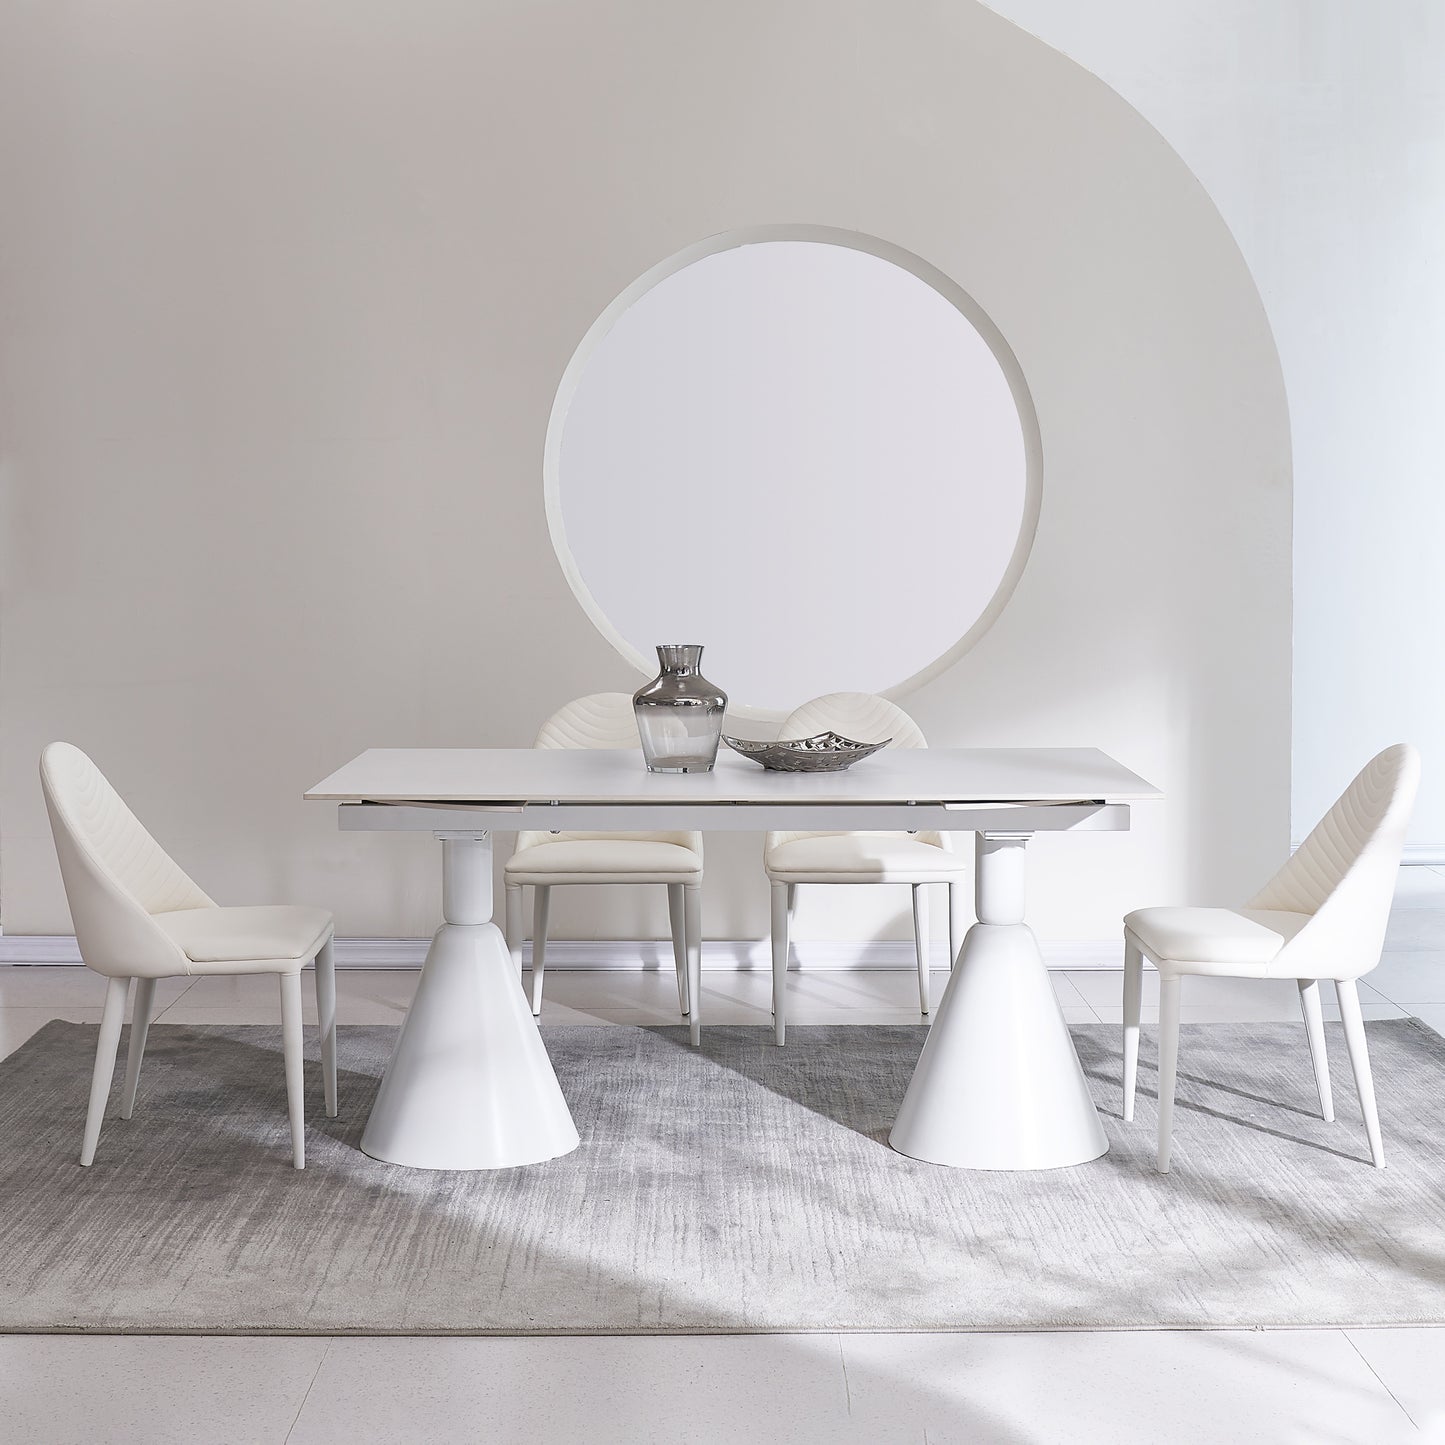 94.9" Modern Oval Extendable White Dining Table For 8 Seater With Sintered Stone Top & Stainless Steel Base